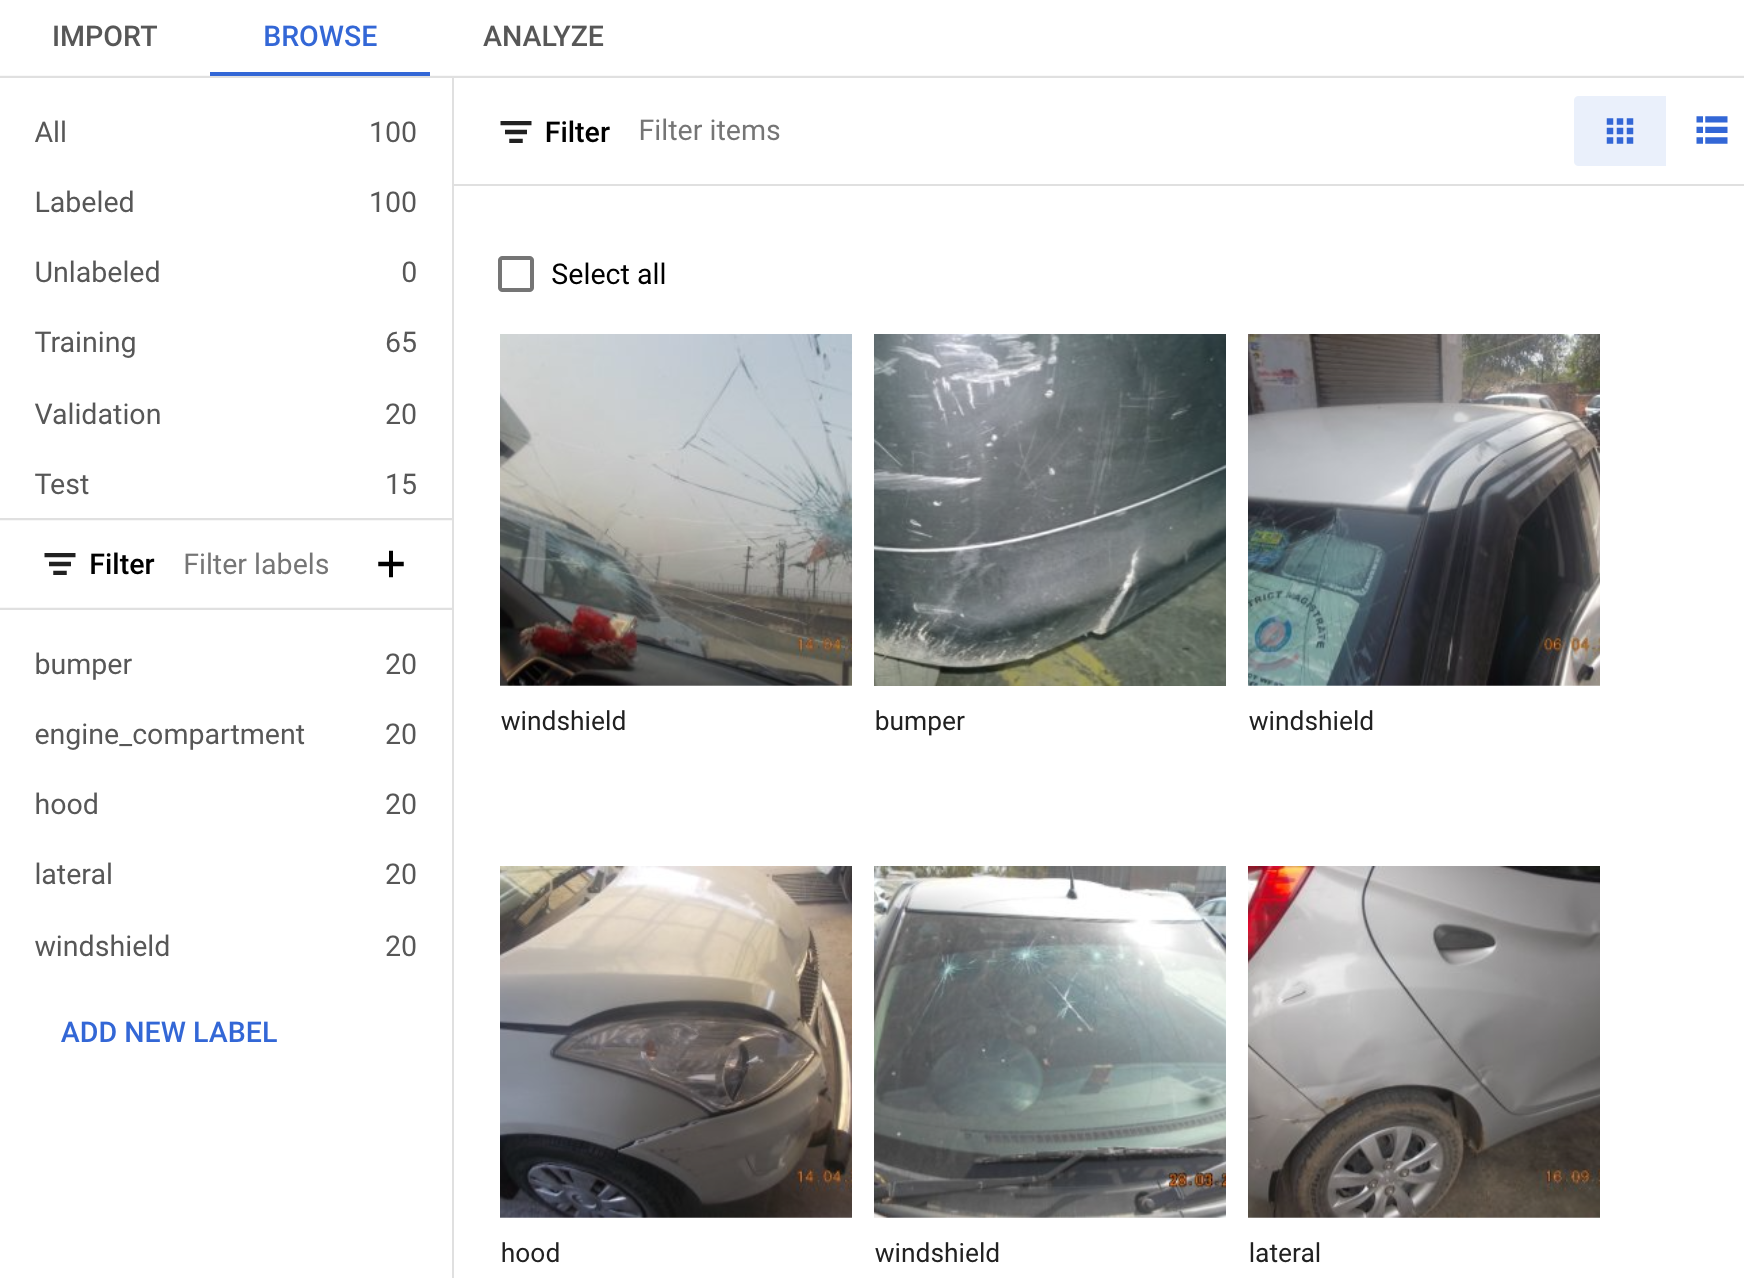 Image tiles on the Browse tabbed page